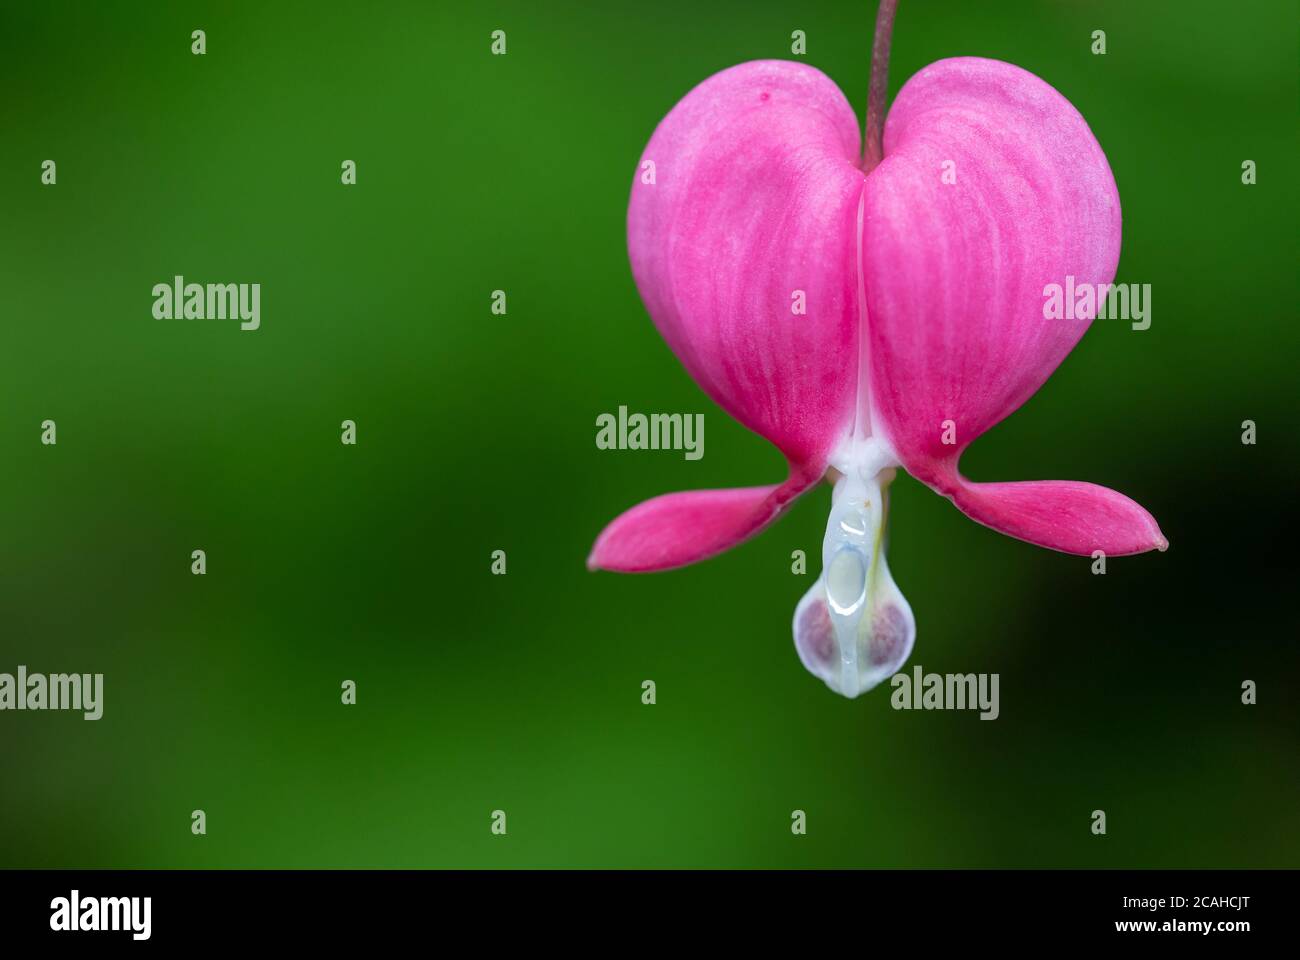 Closeup of single pink bleeding heart flower with blurred green background Stock Photo